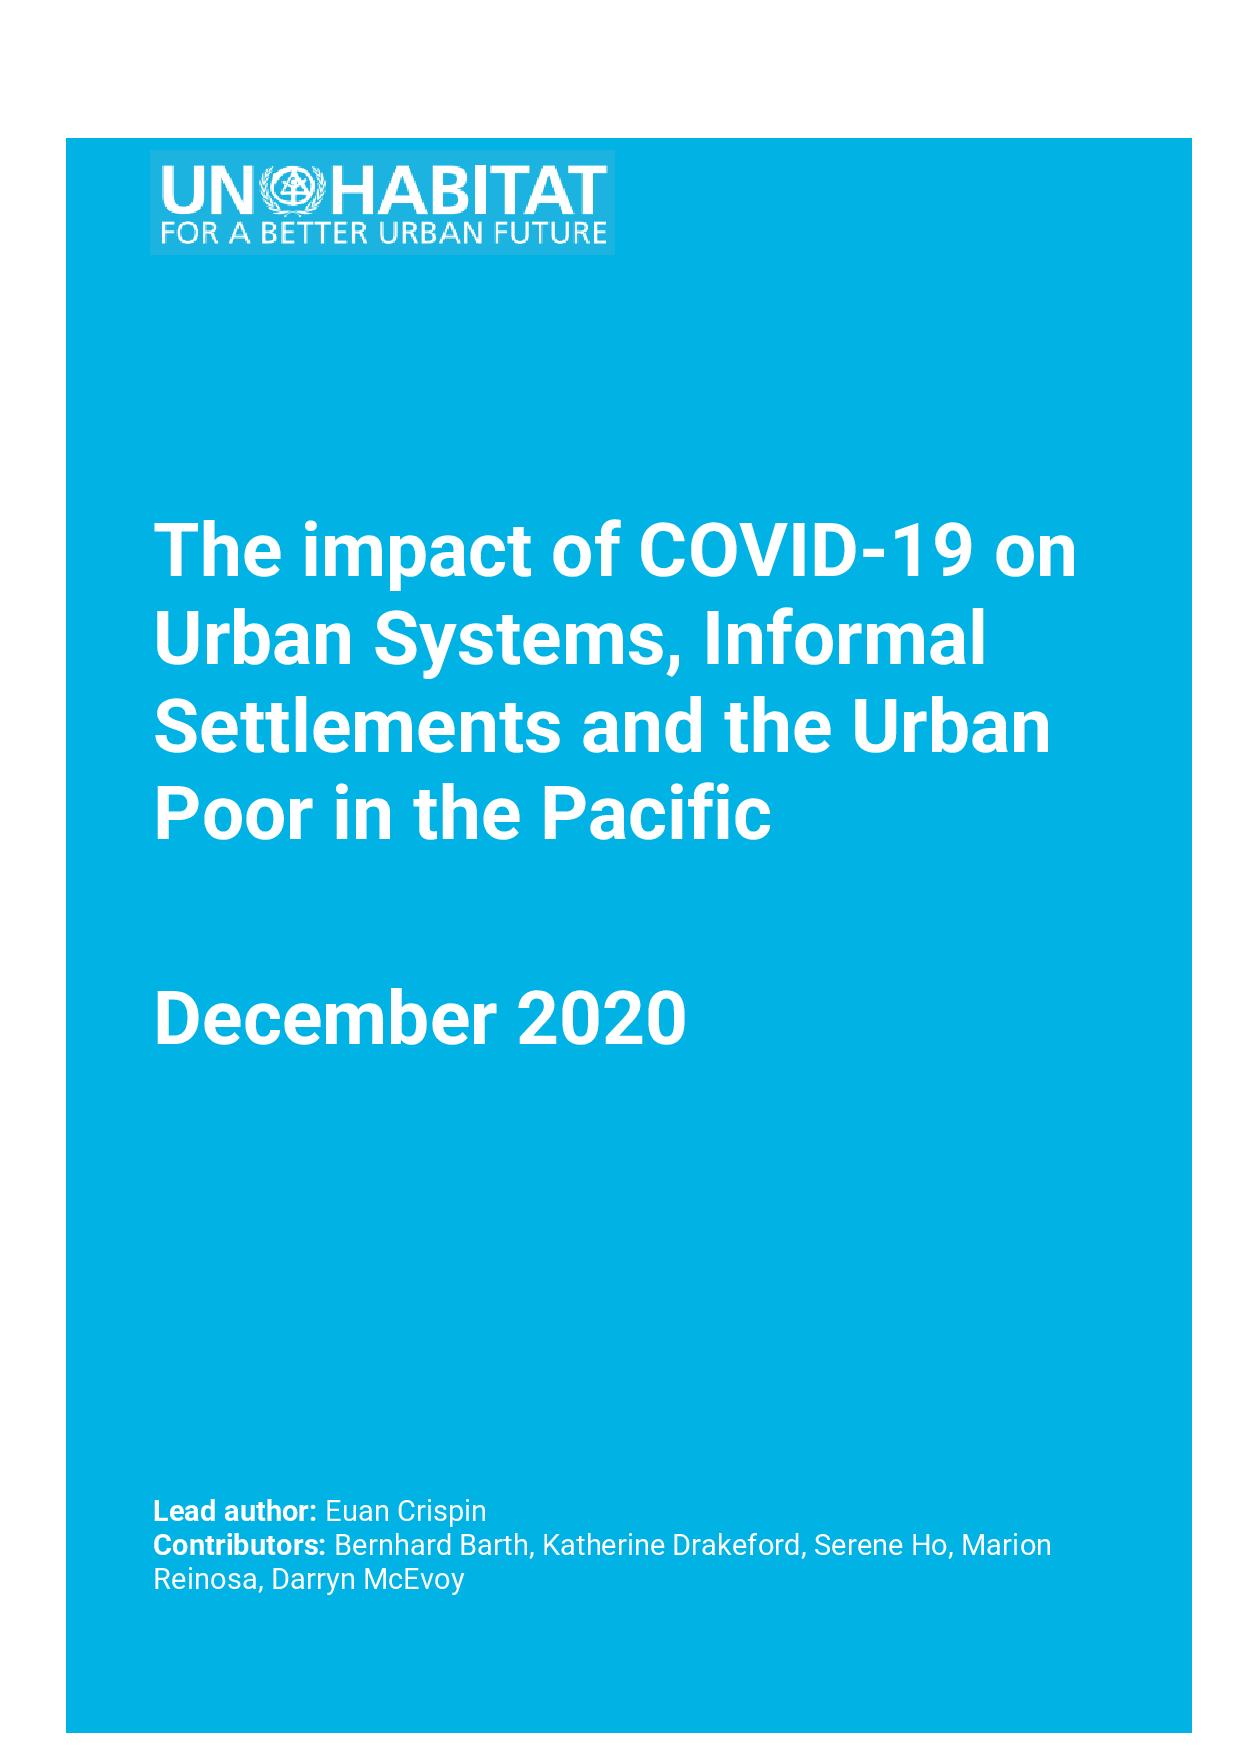 The impact of COVID-19 on Urban Systems, Informal Settlements and the Urban Poor in the Pacific